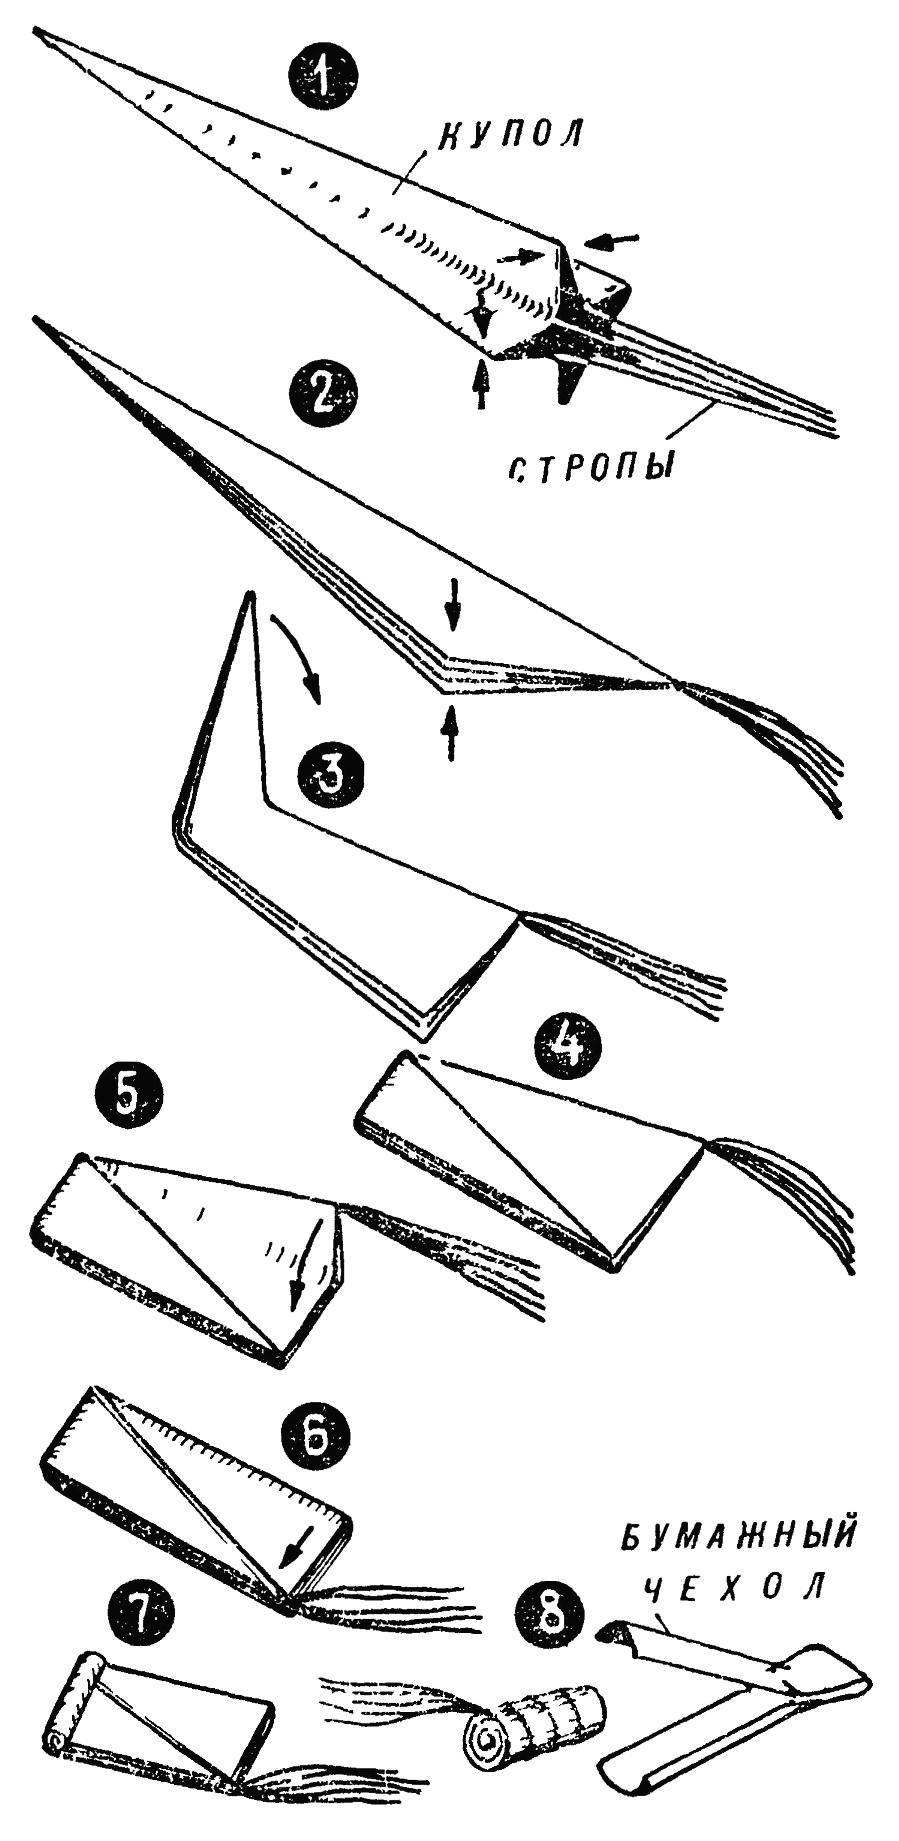 Fig. 3. Laying a parachute.